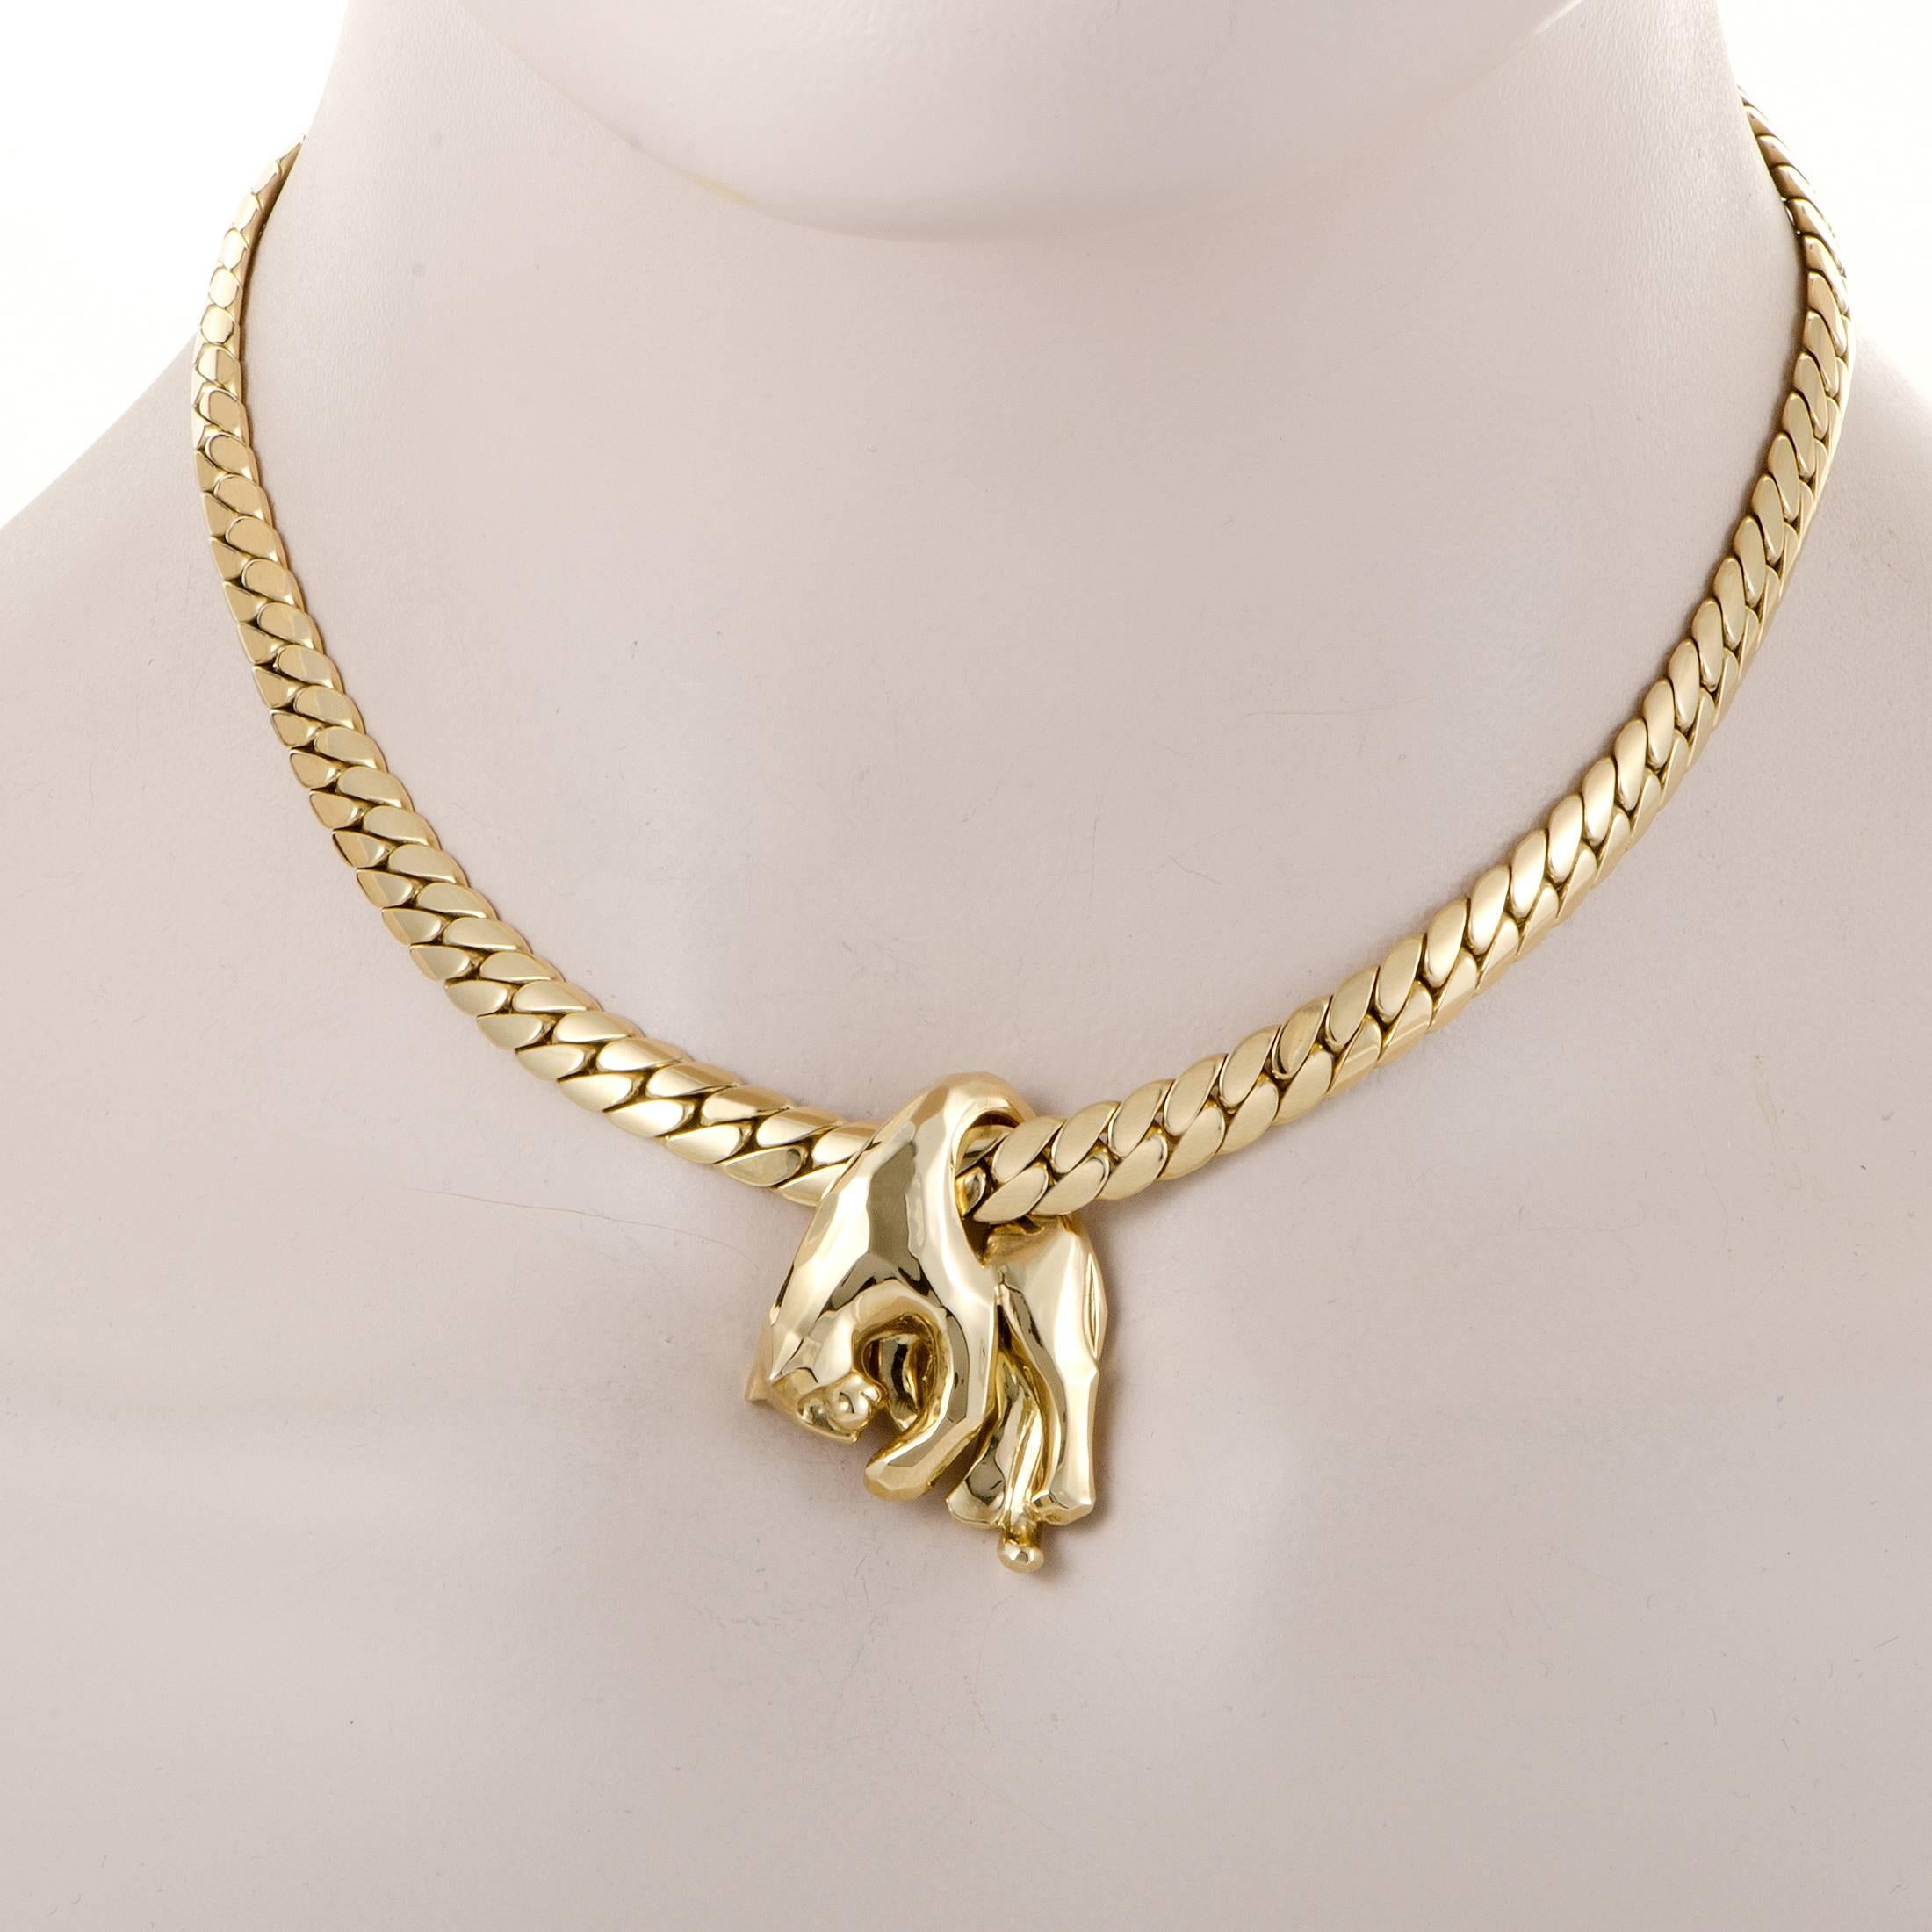 The compelling vintage style and refined taste of this very rare 18K yellow gold necklace from Cartier produce an aura of classic luxury while the intriguing pendant boasts the brand's iconic shape of a panther in a slightly offbeat